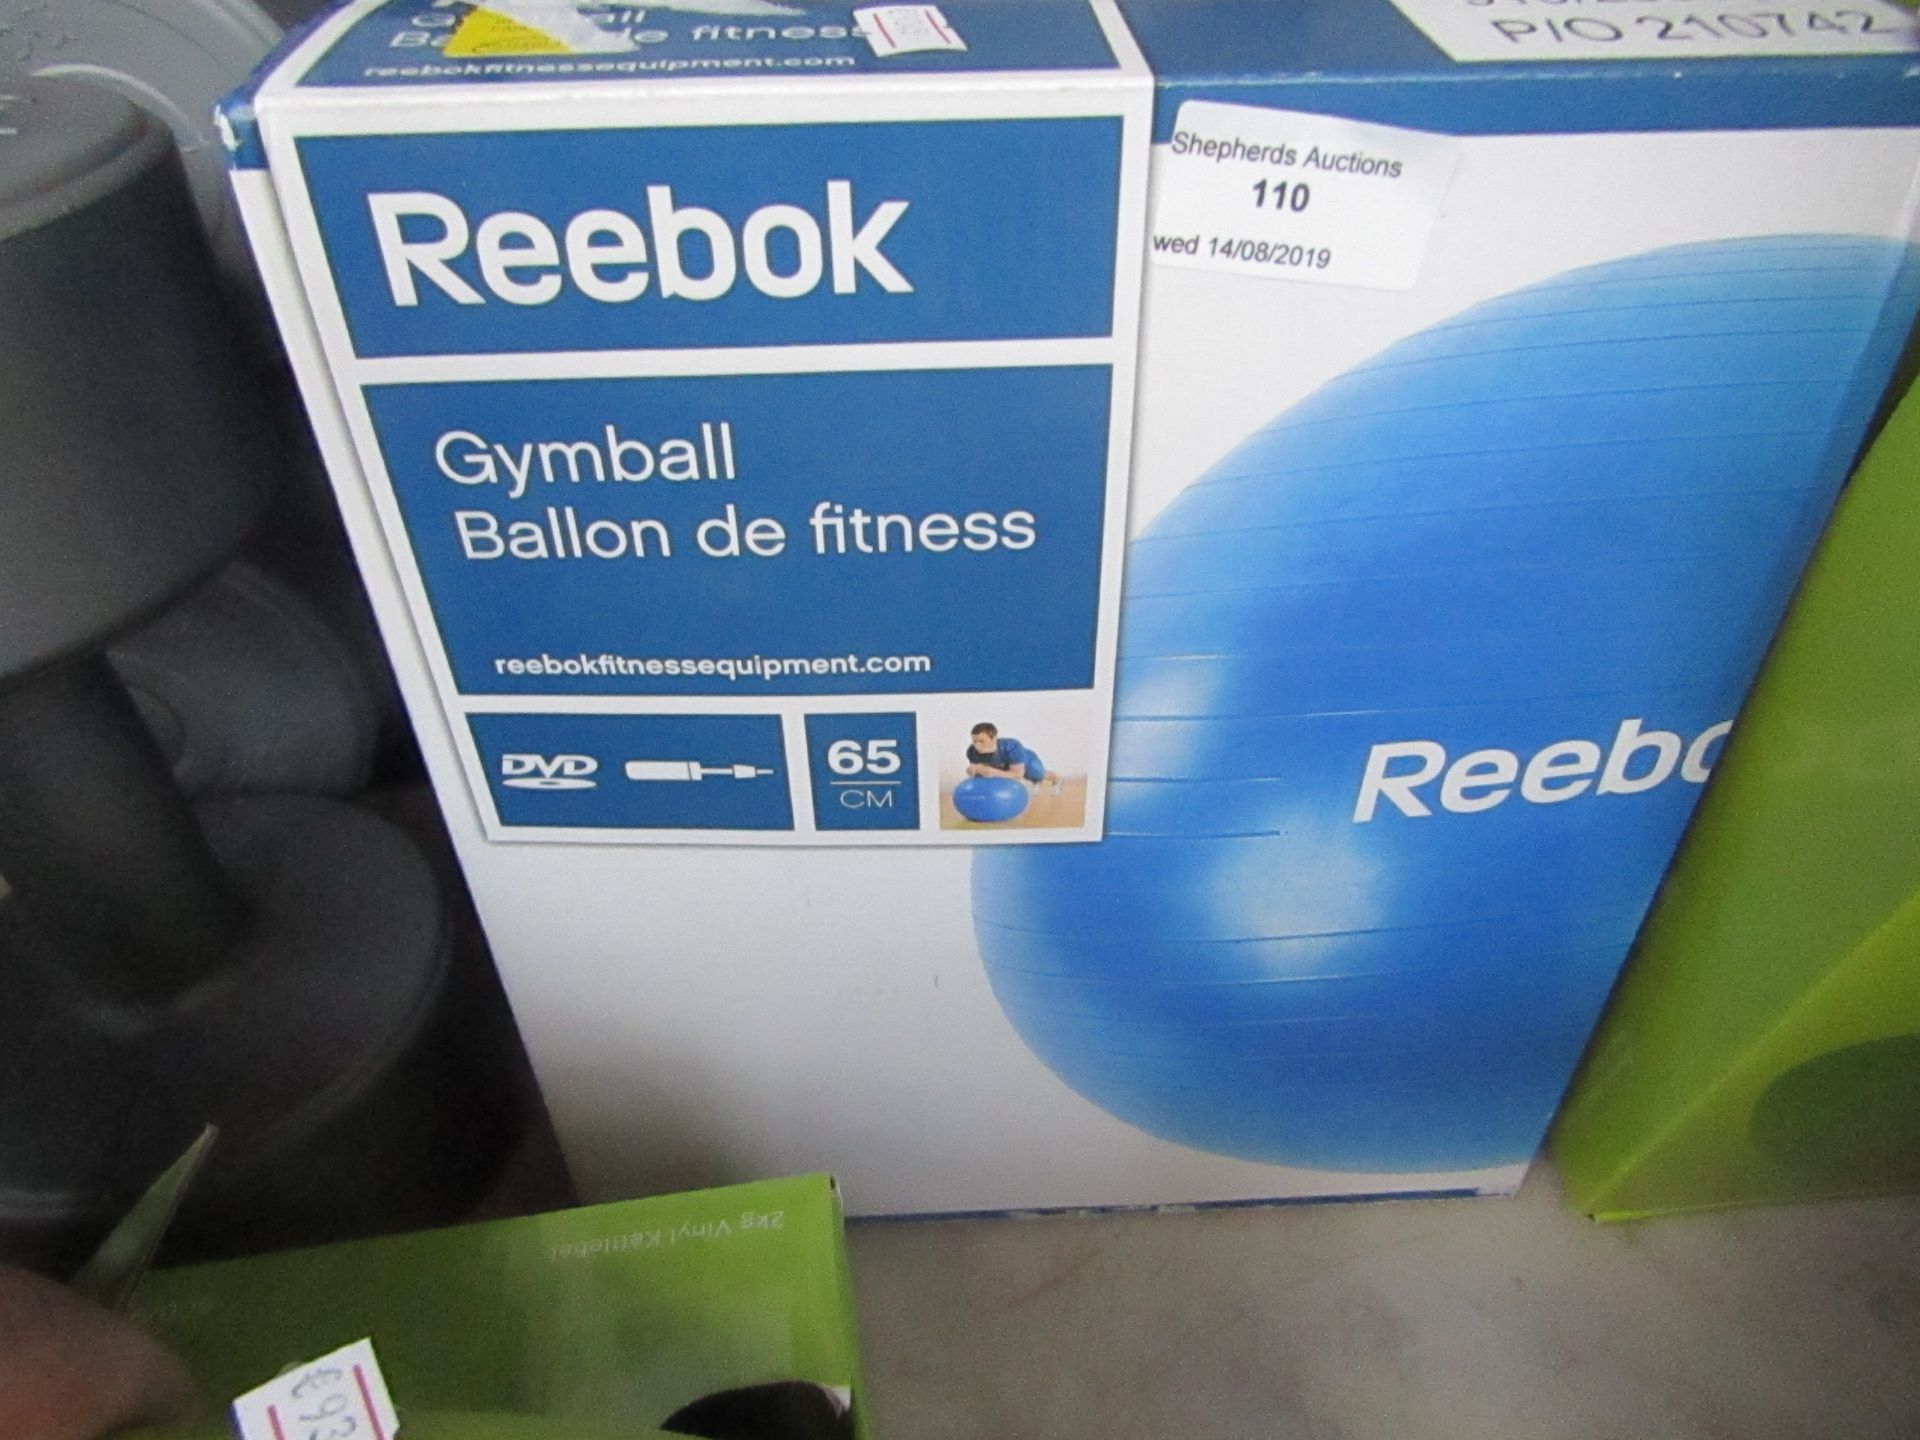 Reebok gymball fitness ball, unchecked and boxed.